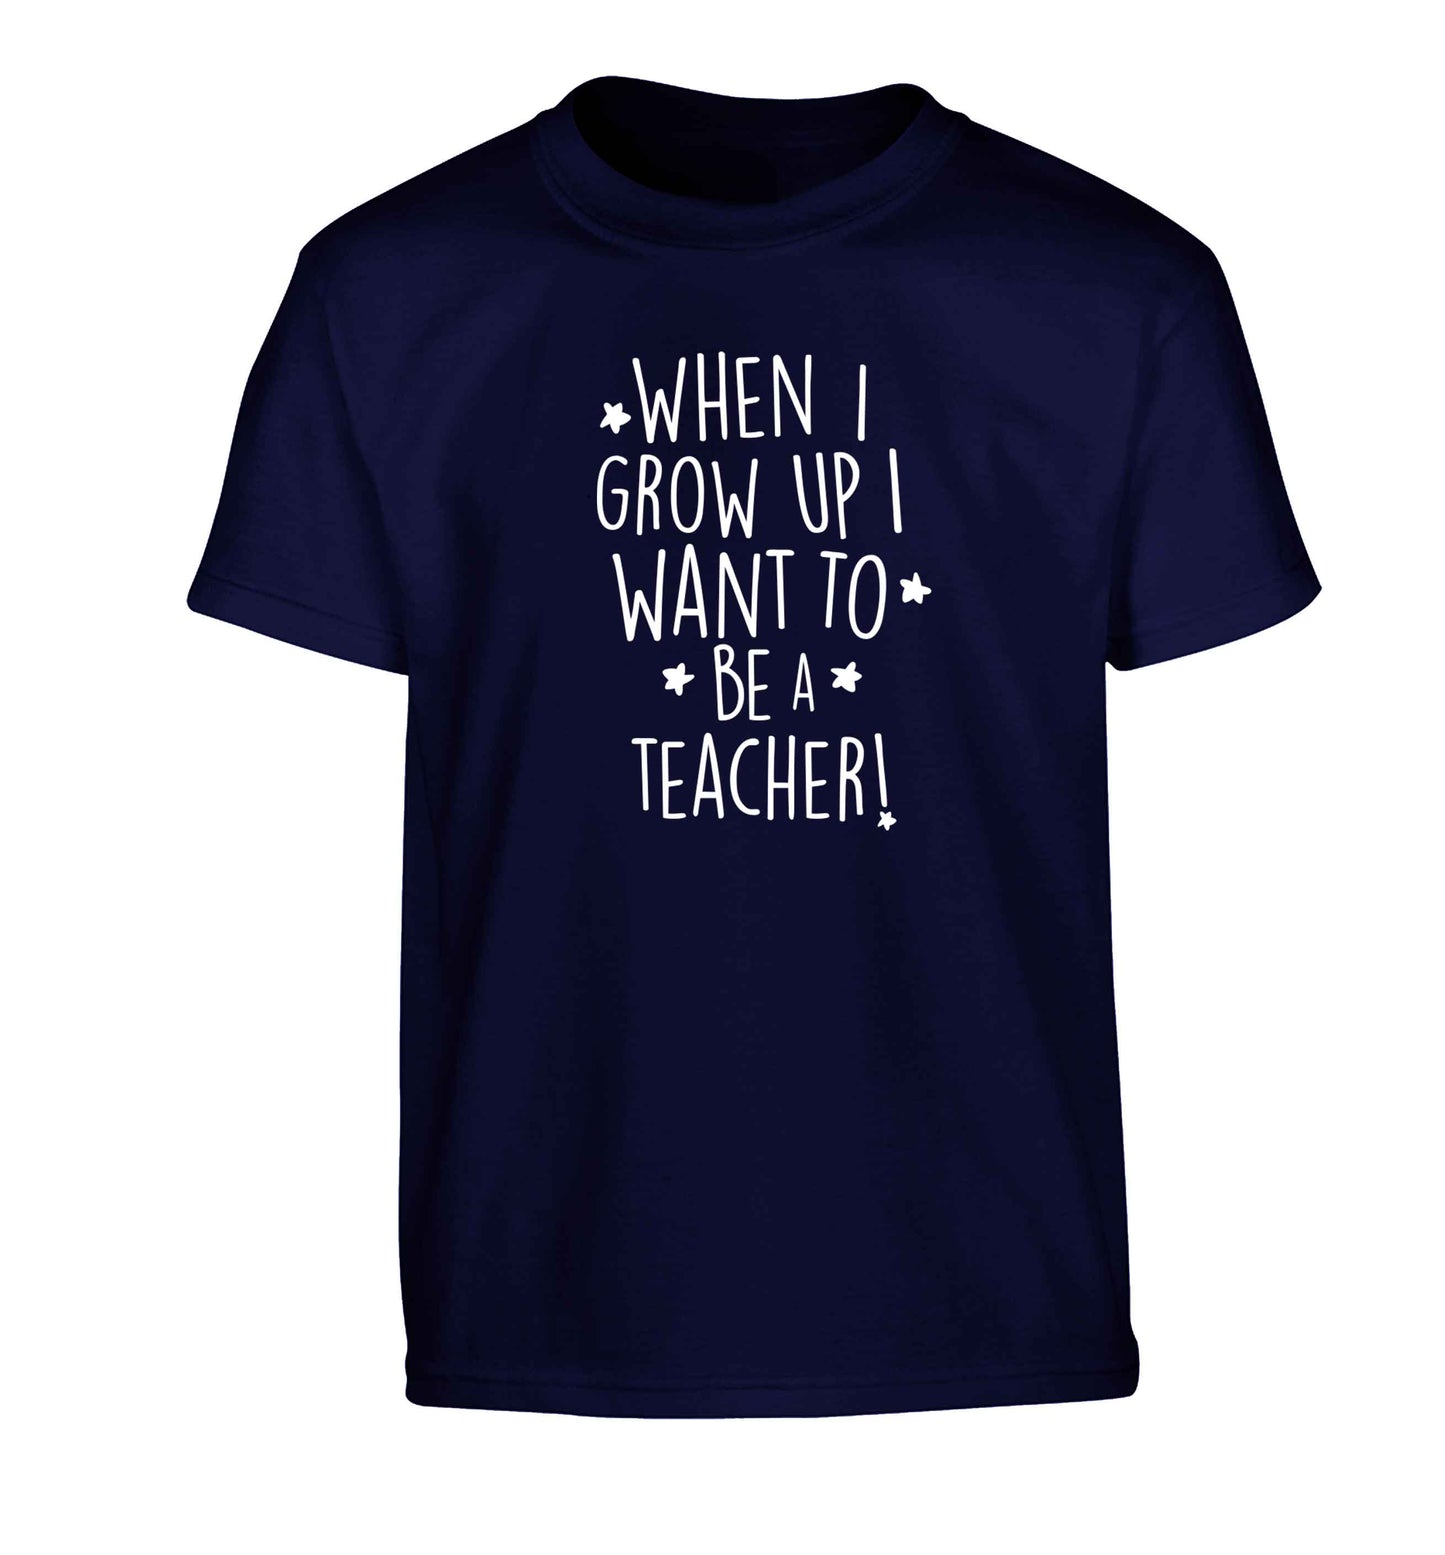 When I grow up I want to be a teacher Children's navy Tshirt 12-13 Years